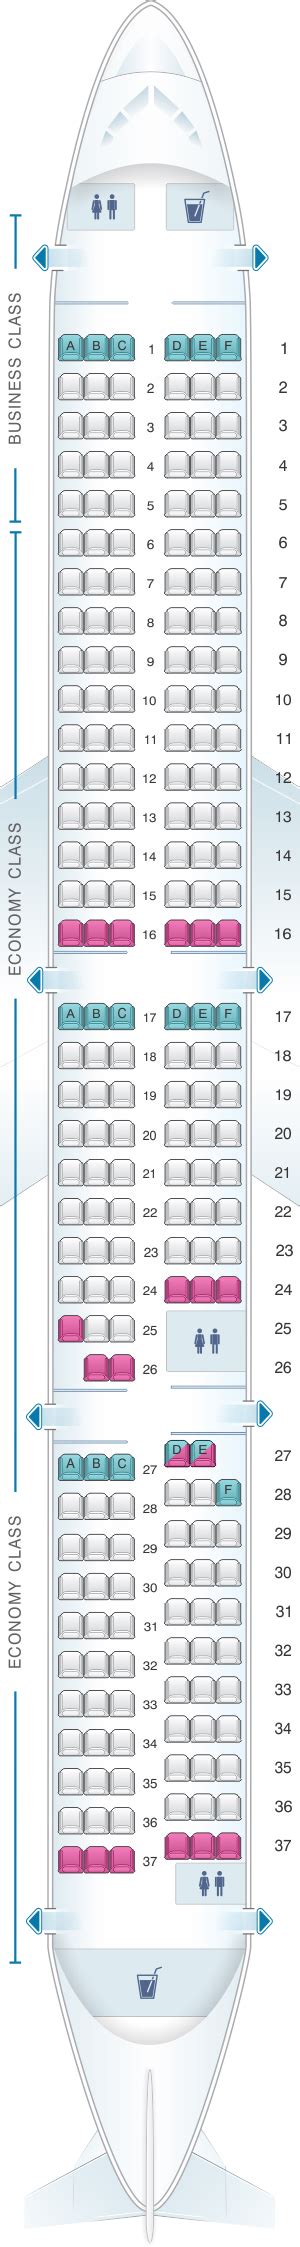 Seat Map Of Airbus A Neo Seat Map In Flight Travel Information My Xxx